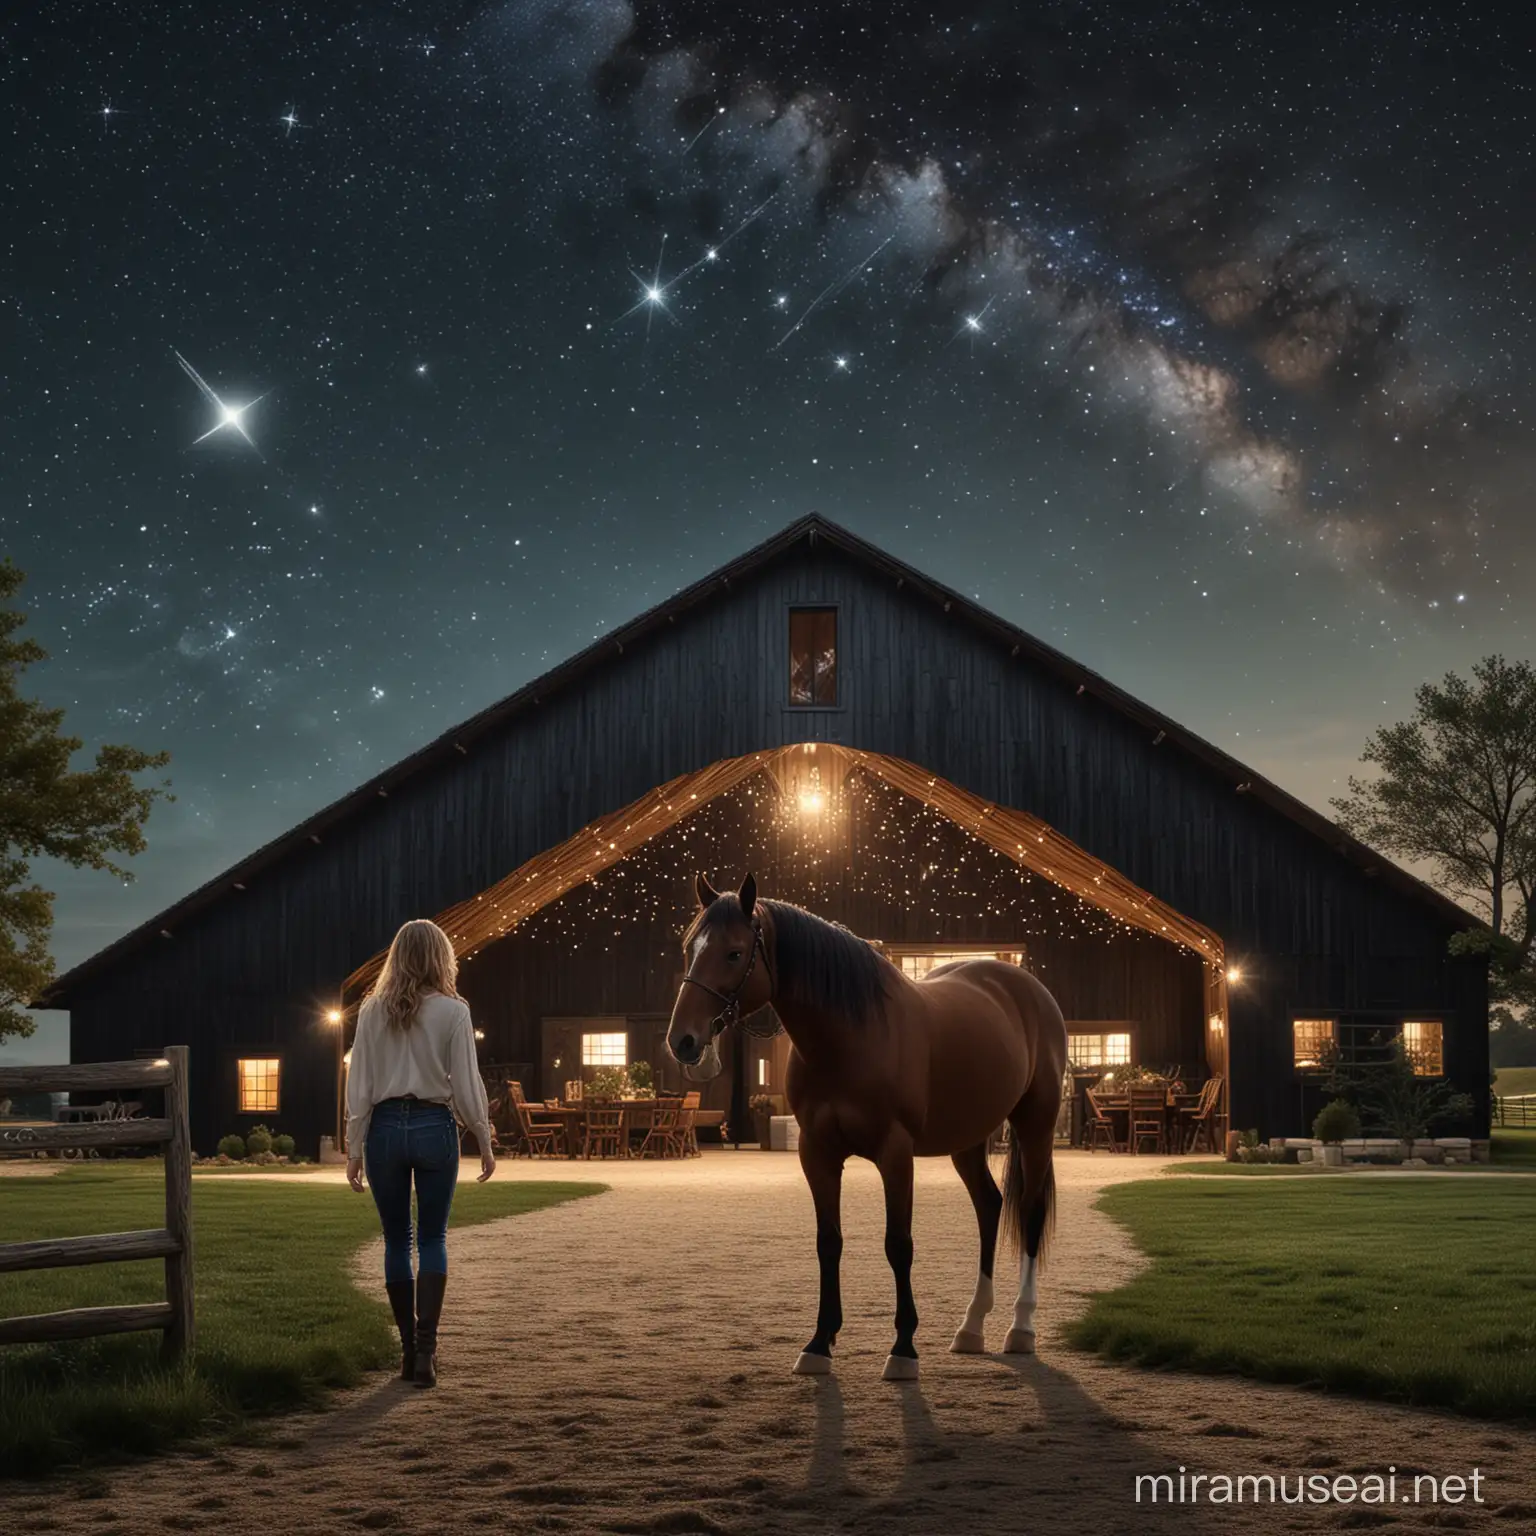 Luxurious Barn Night Wealthy Family and Horse under a Magical Starry Sky